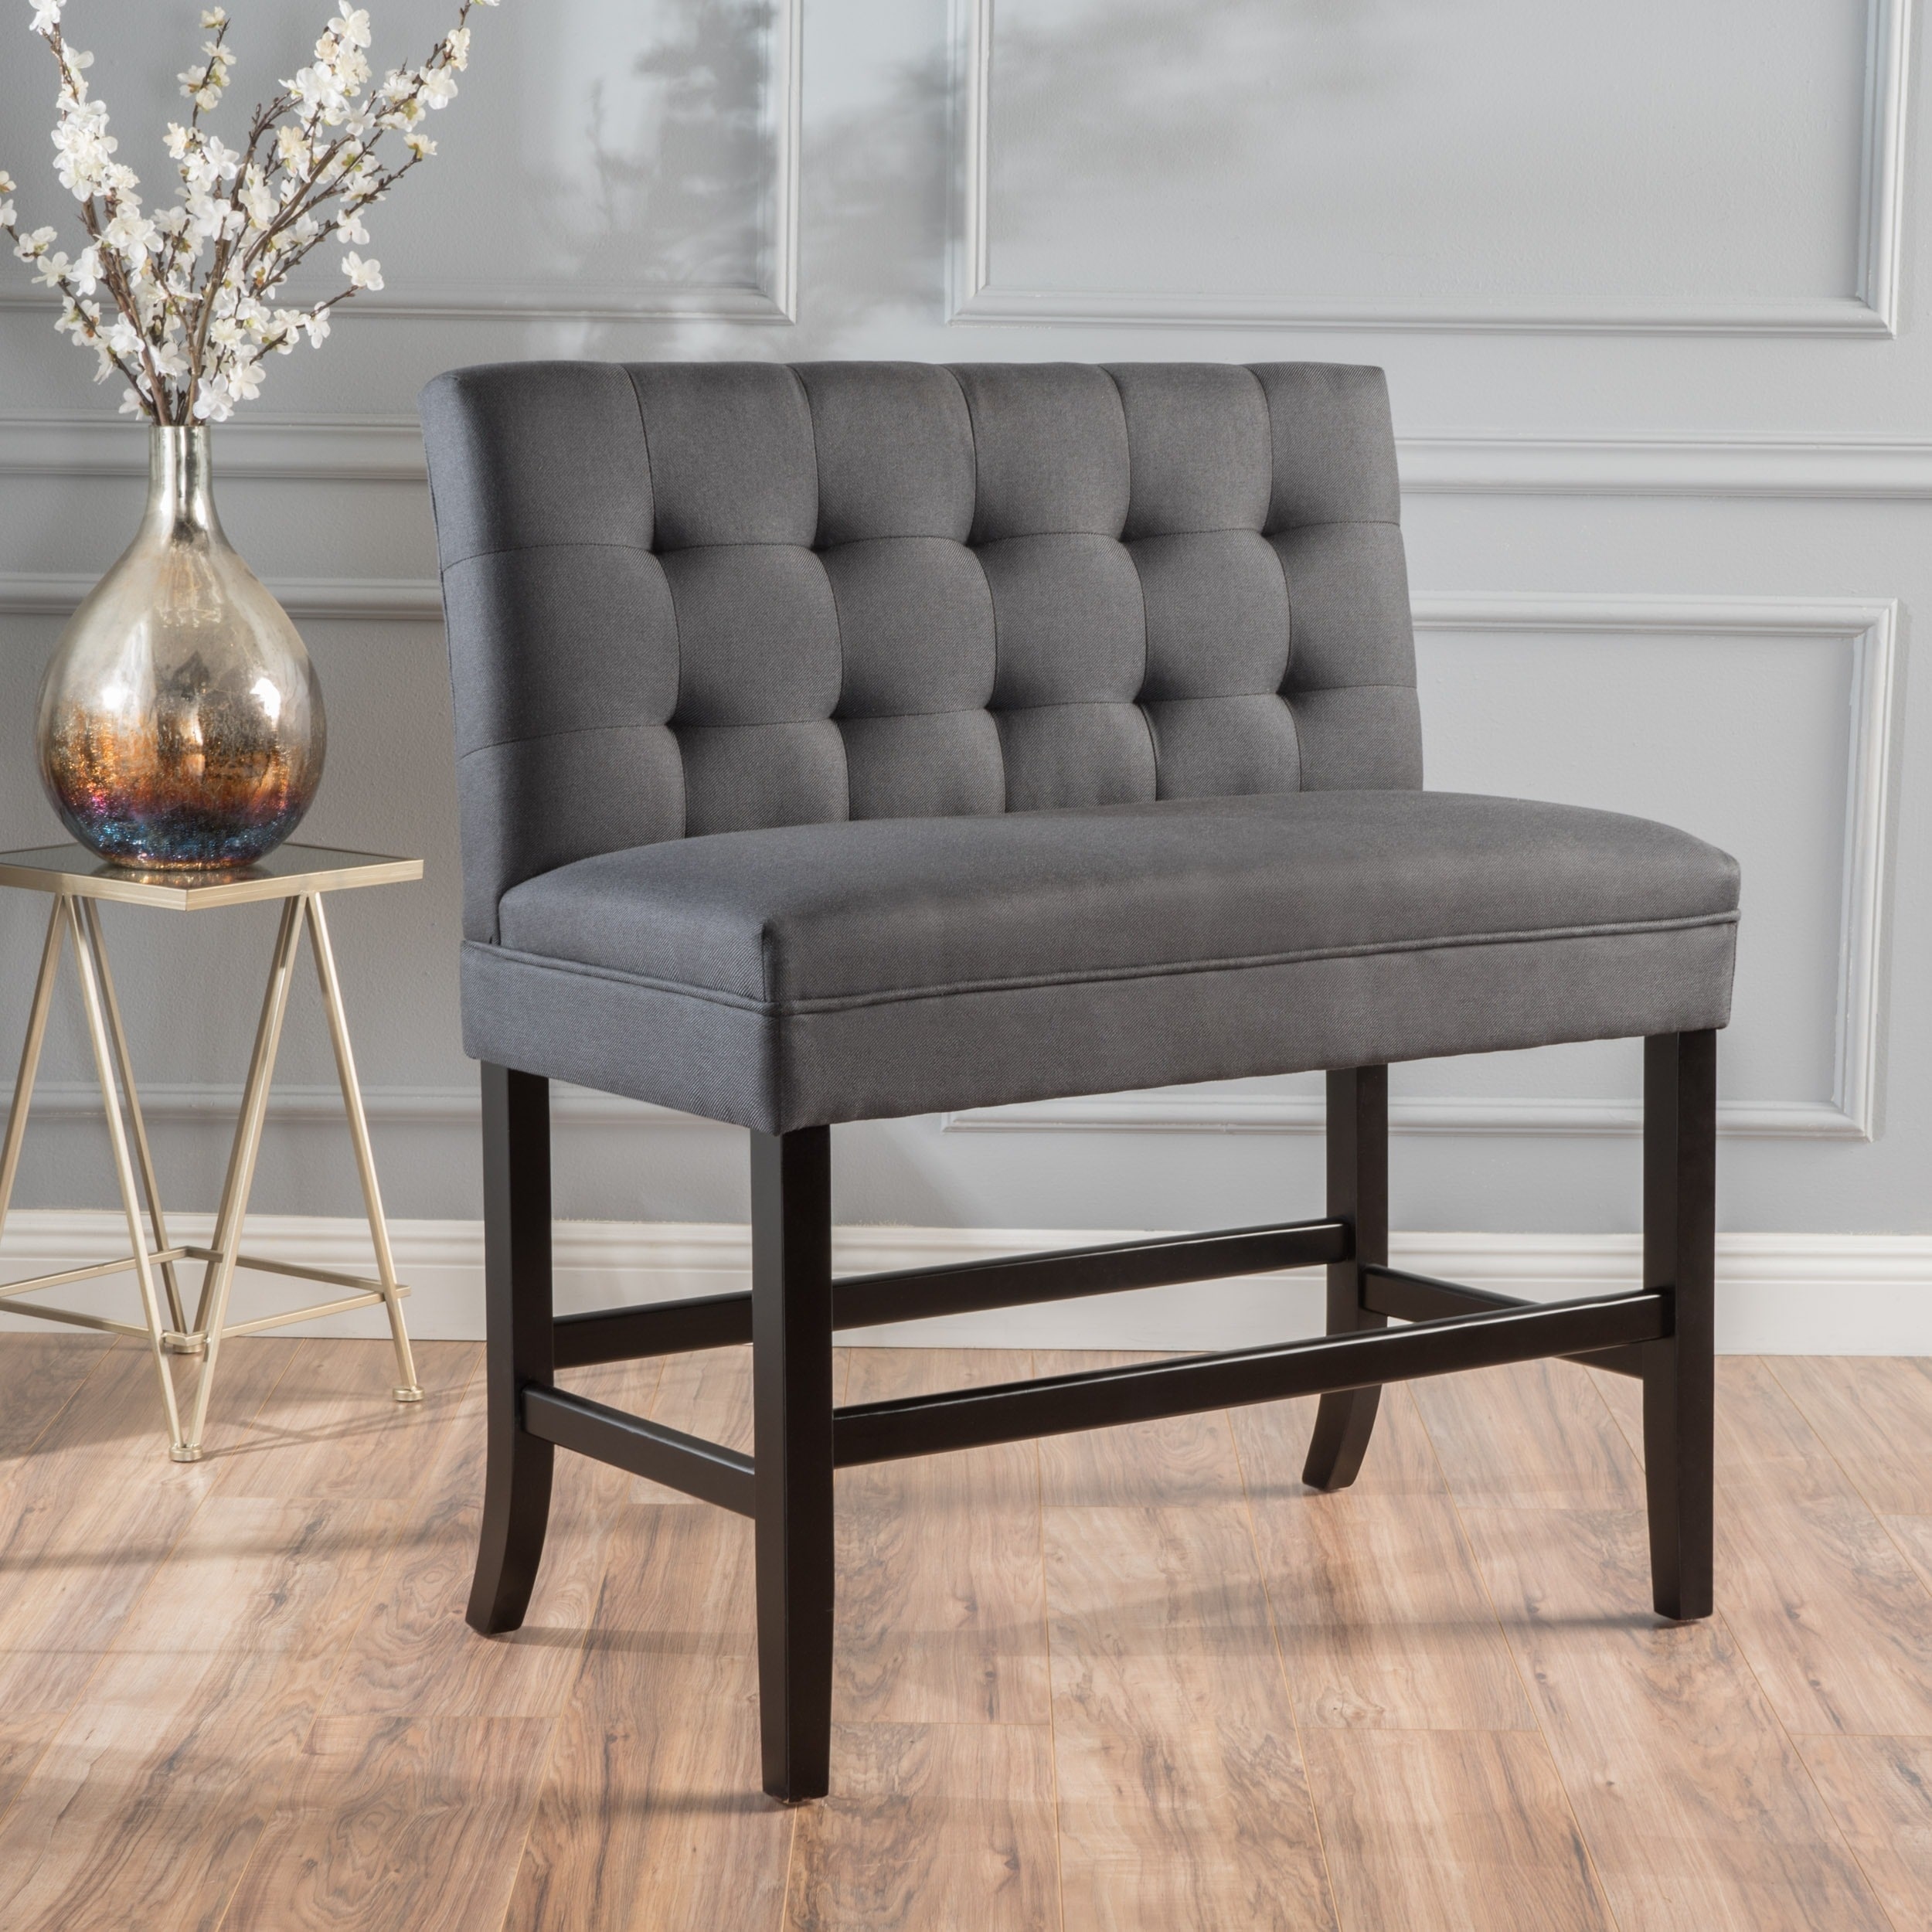 Barstool - & - - Fabric Dining Sale by Christopher On Home 29-inch Beyond Knight Kenan Bench Bed Tufted 14058998 Bath